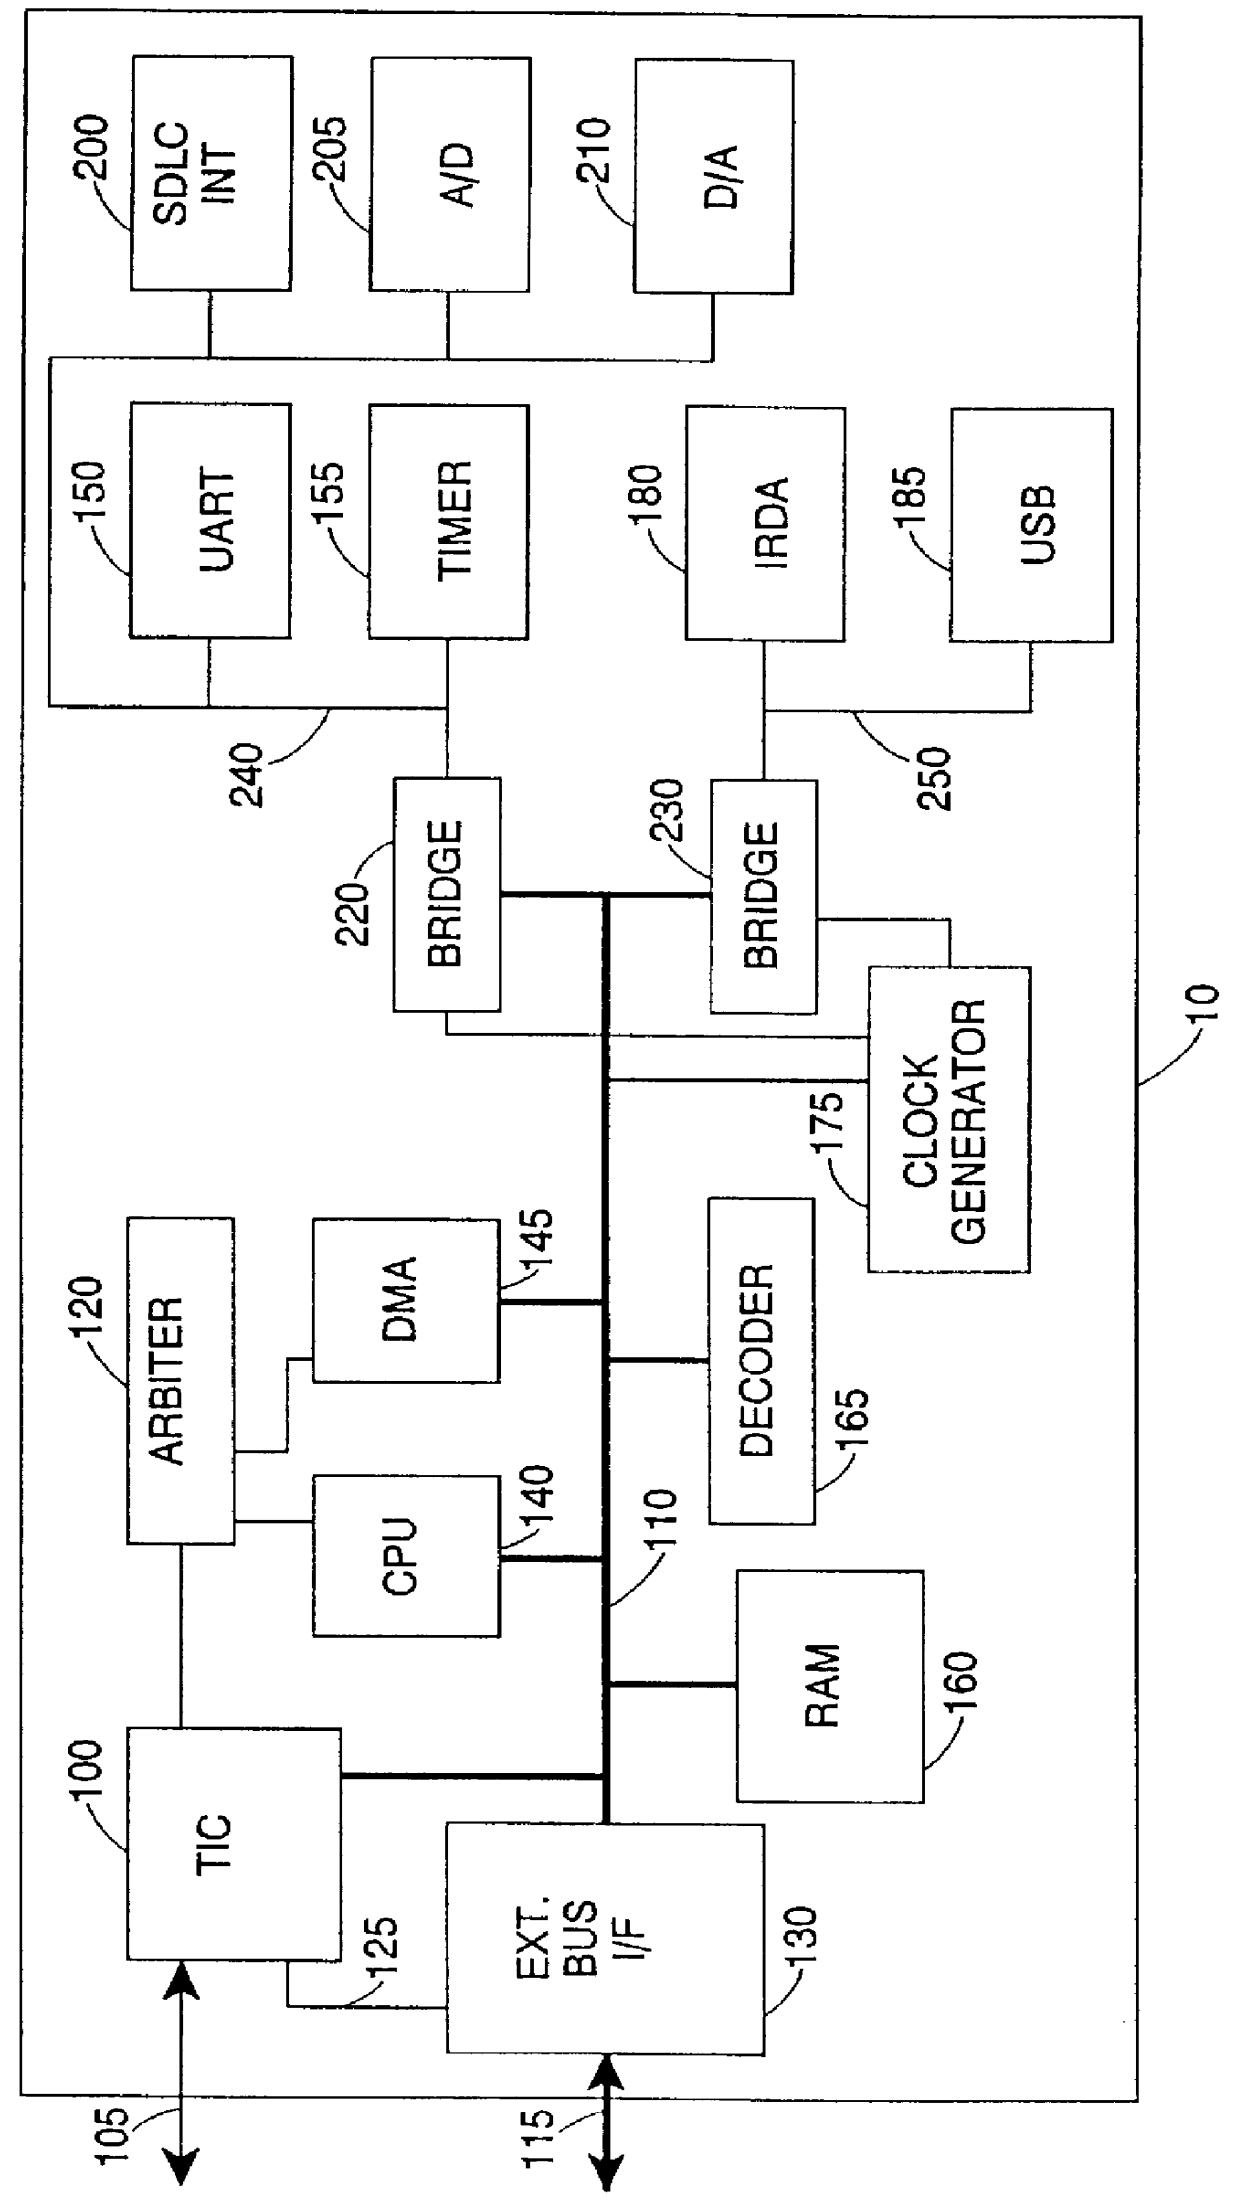 Peripheral buses for integrated circuit